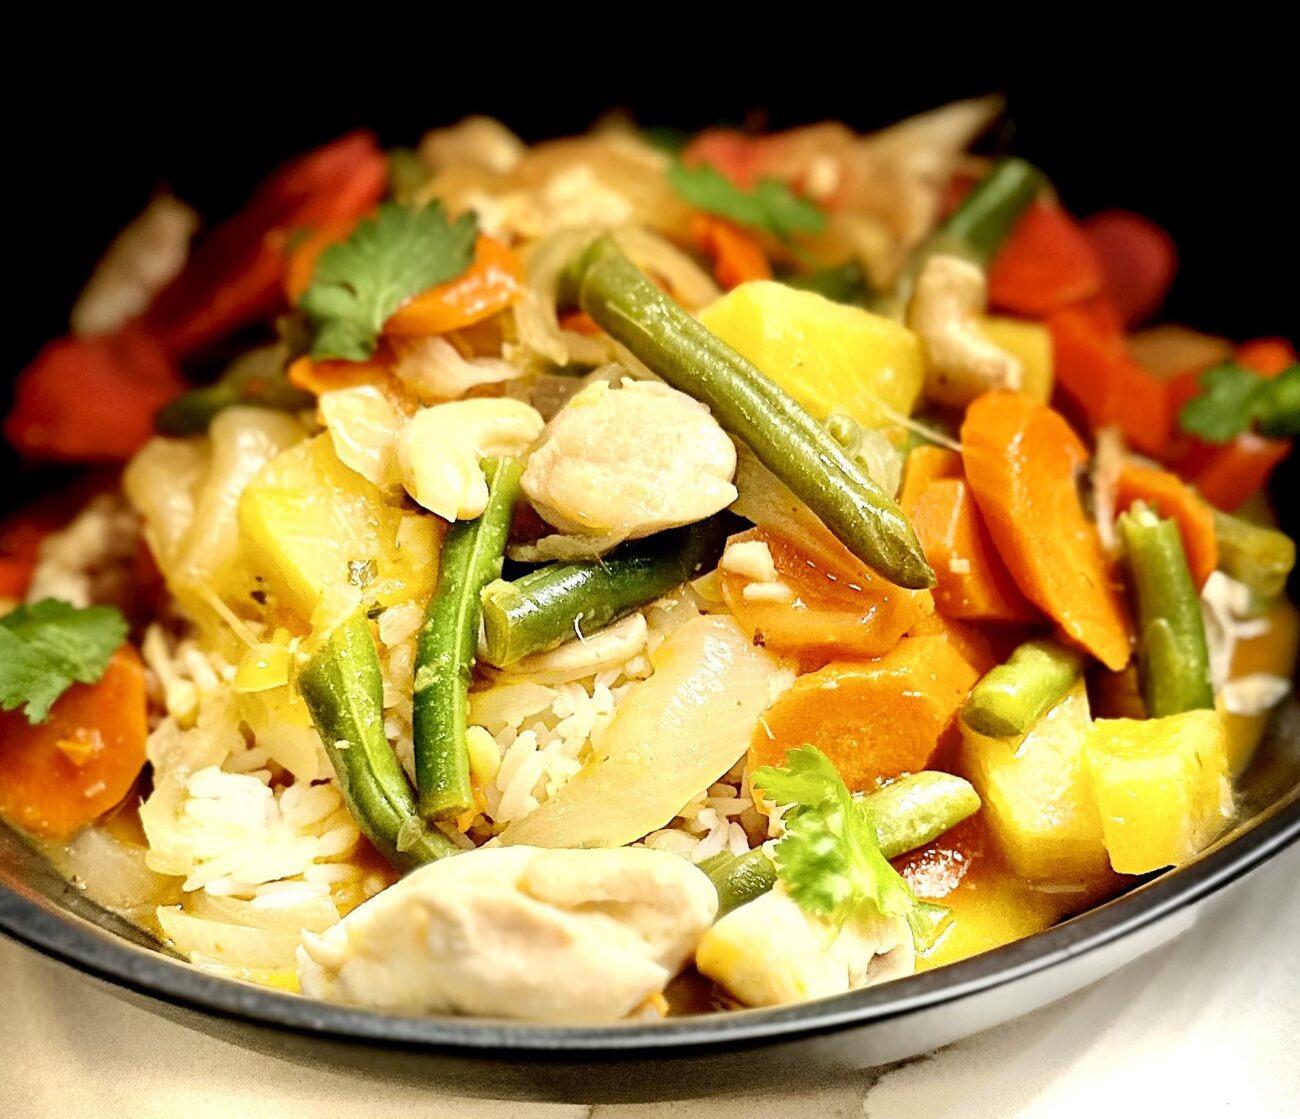 Thai Pineapple Chicken with Cashews and a Coconut & Red Curry Sauce